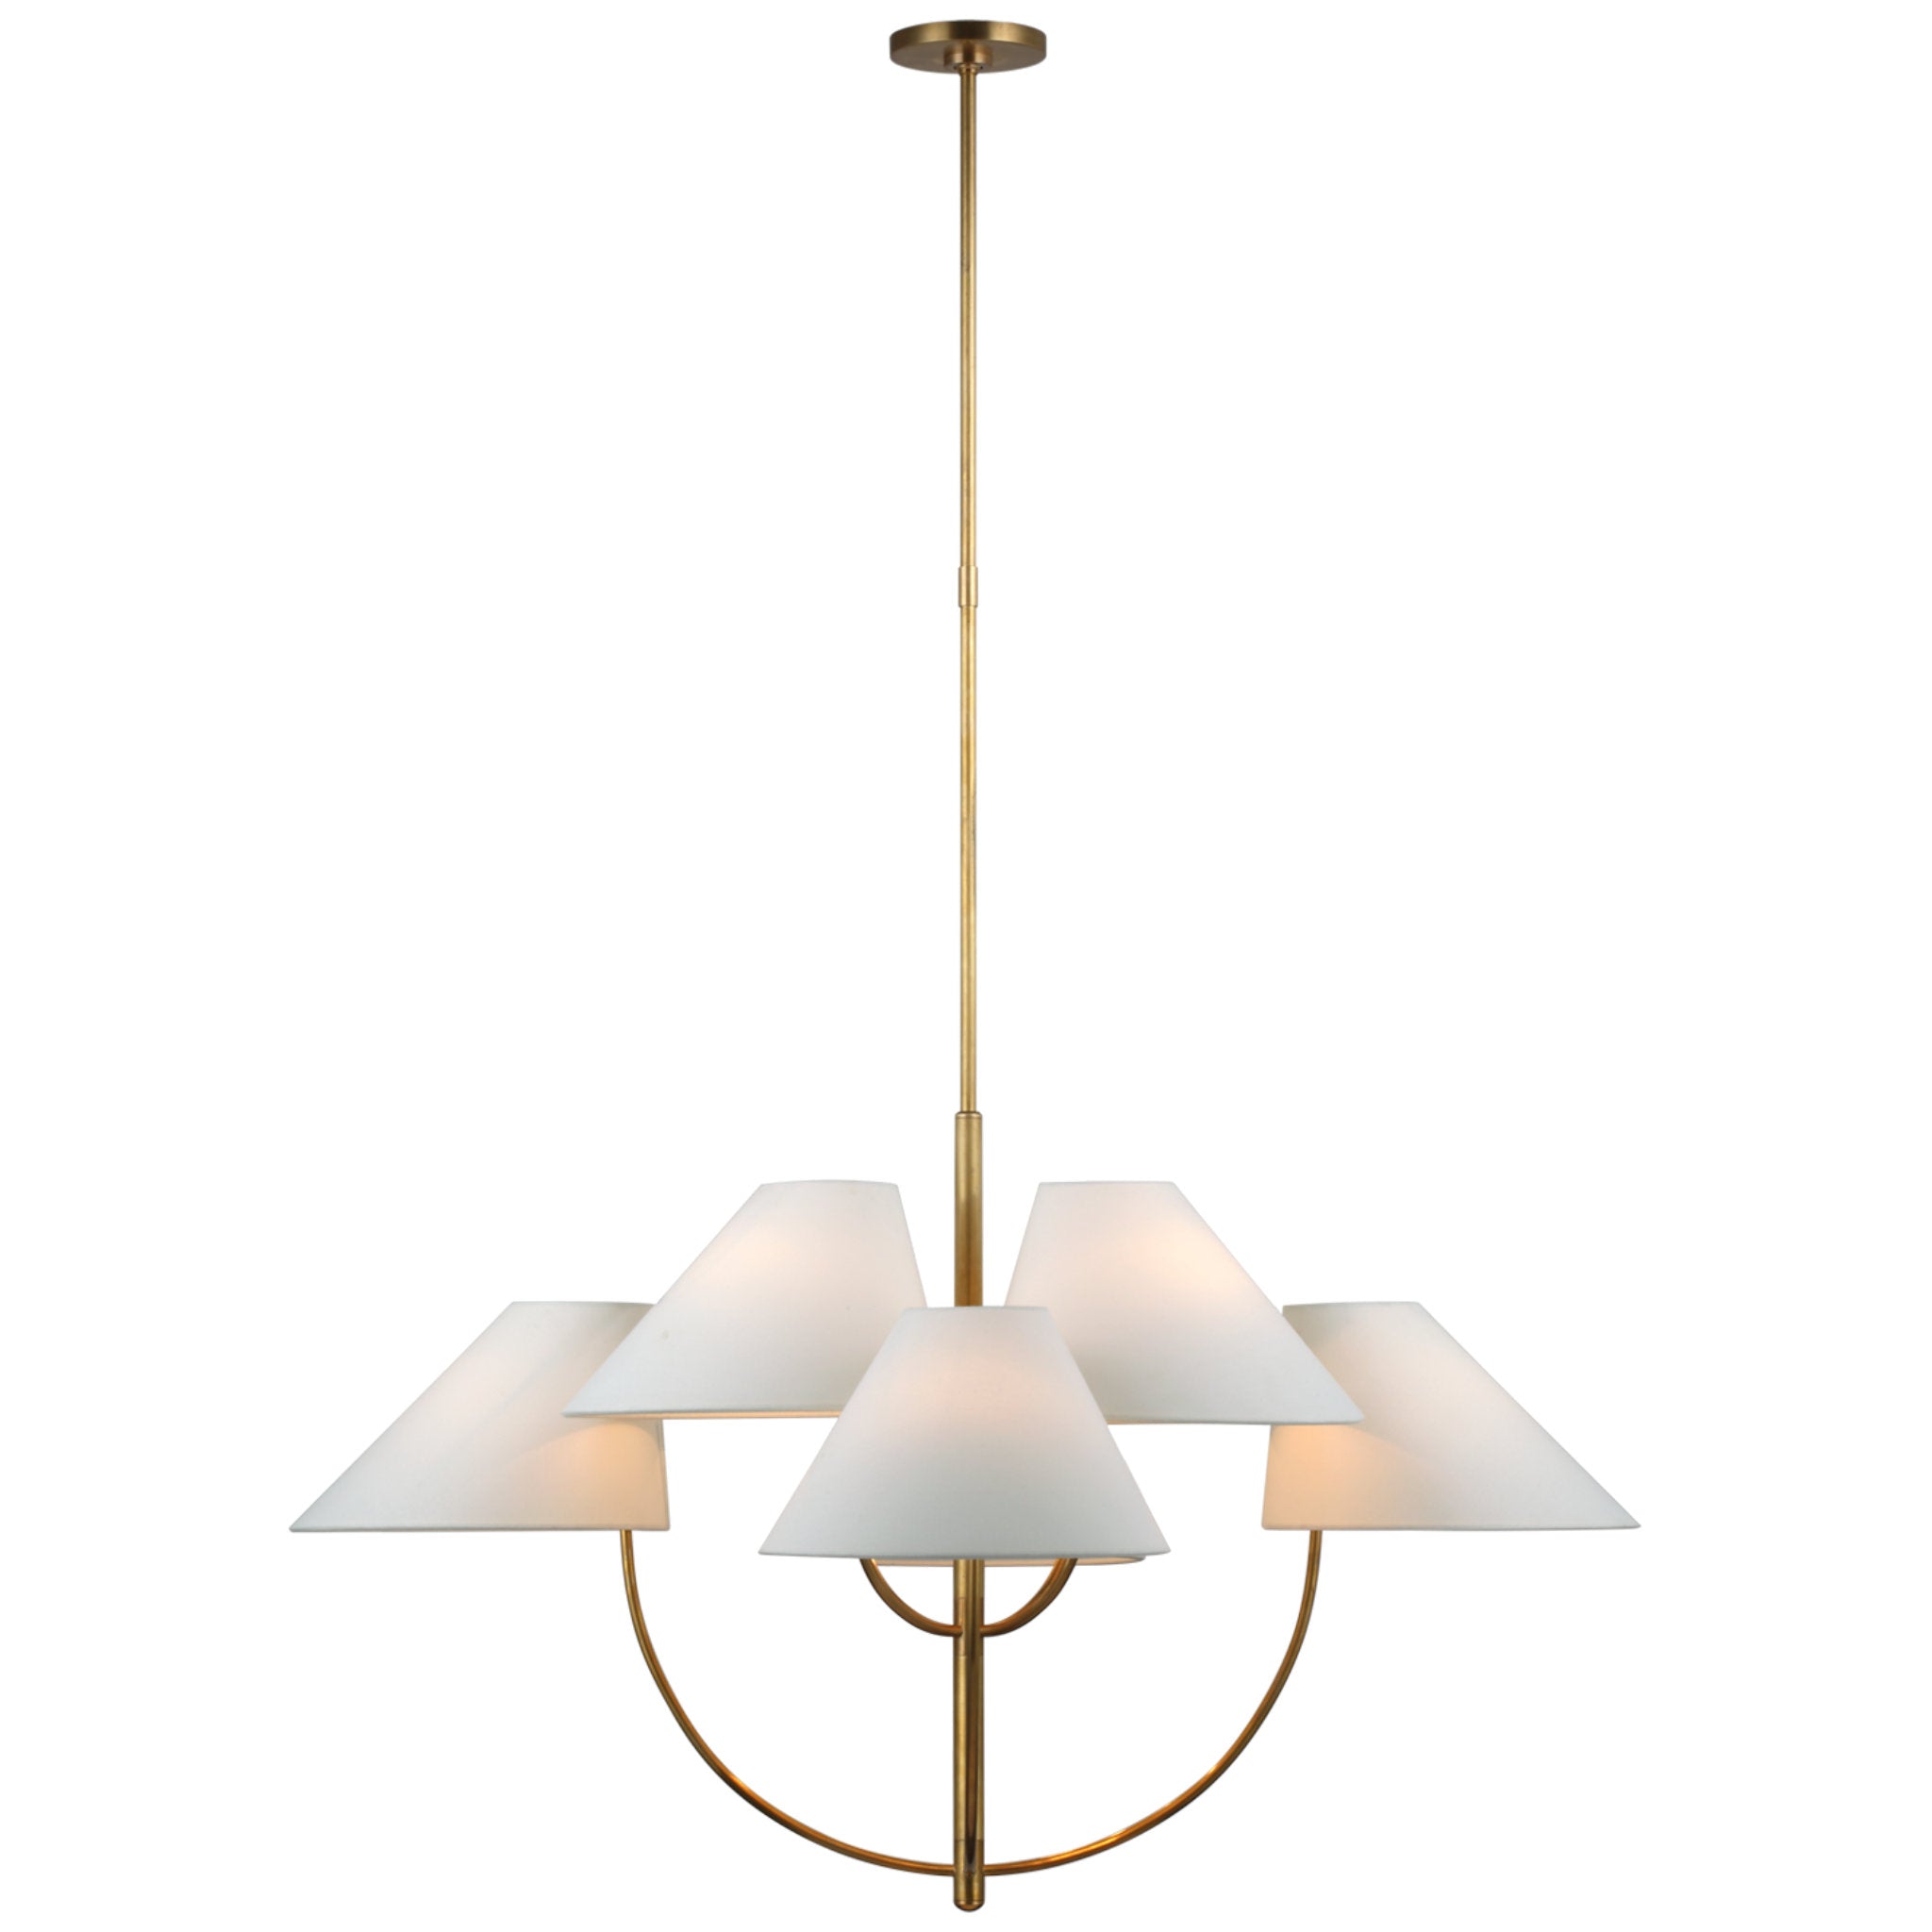 kate spade new york Kinsley Large Two-Tier Chandelier in Soft Brass with Linen Shades